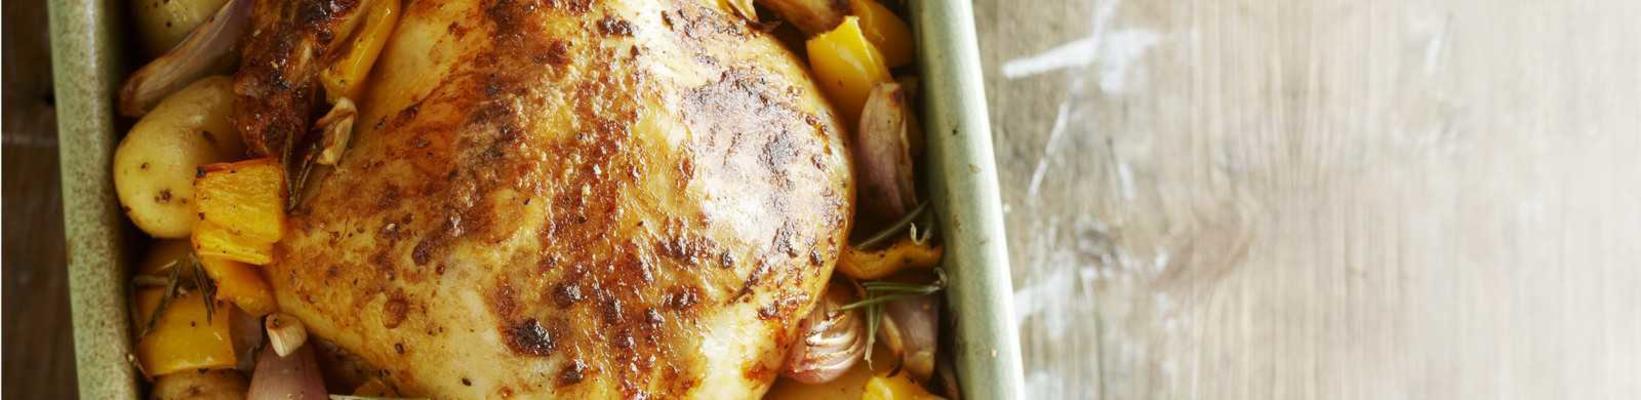 chicken casserole with mustard and yellow pepper